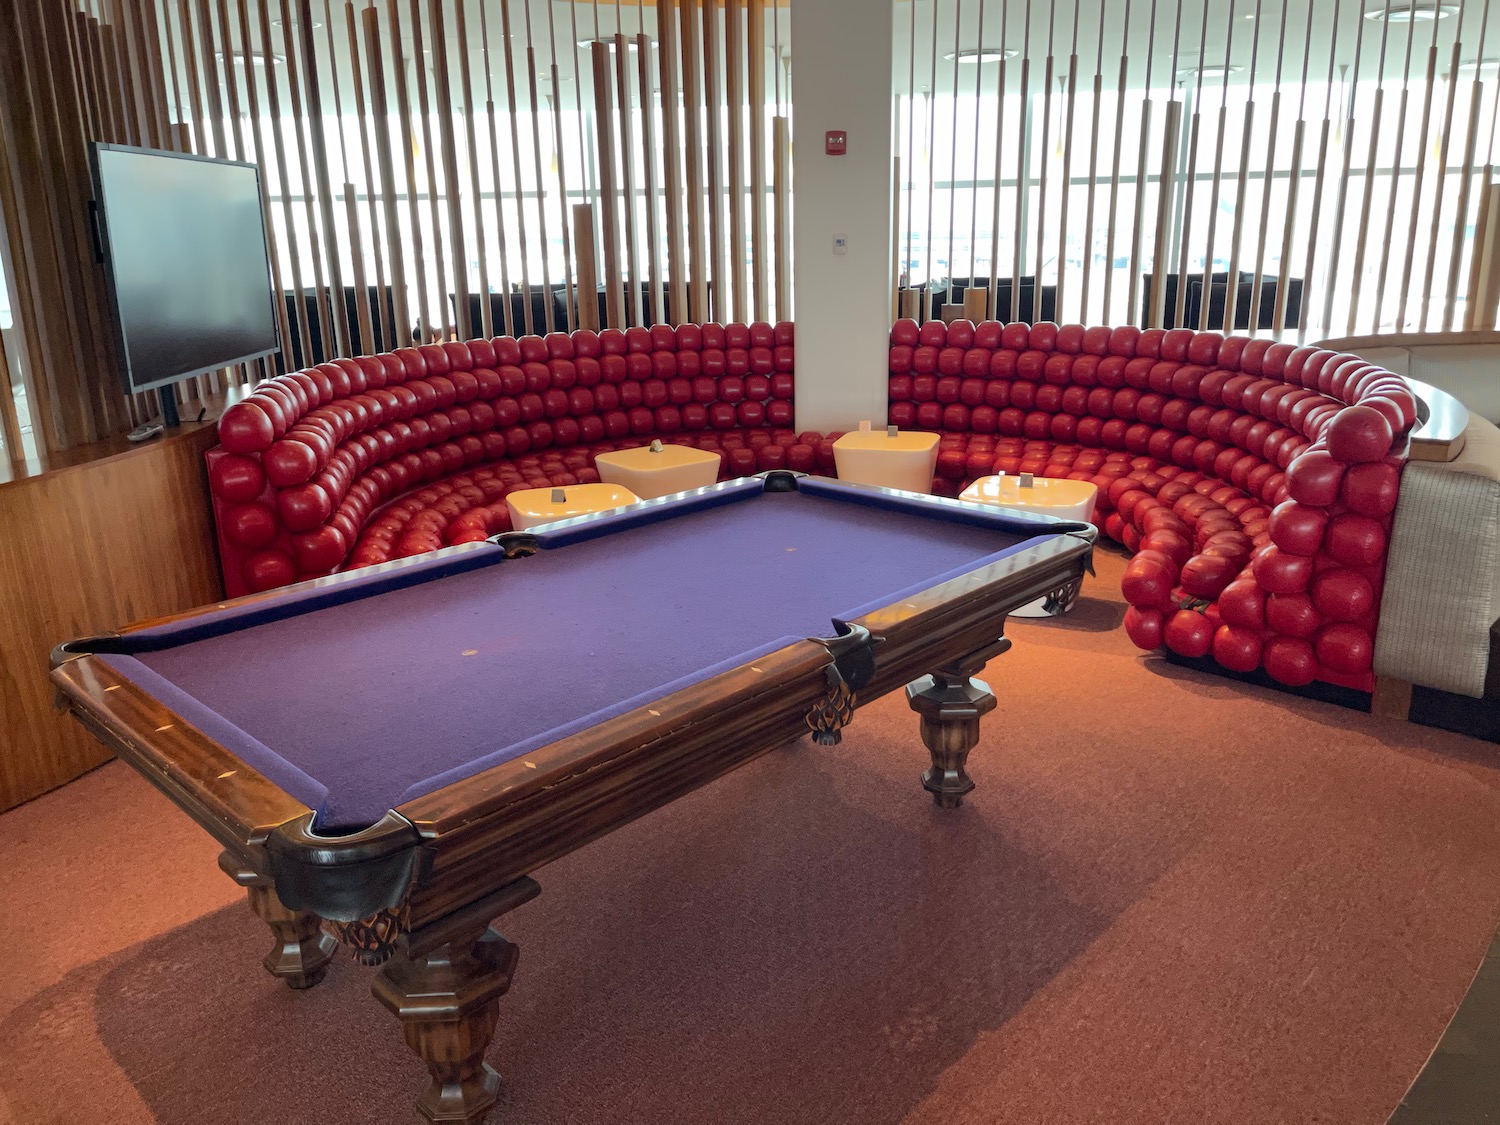 a pool table in a room with red balls